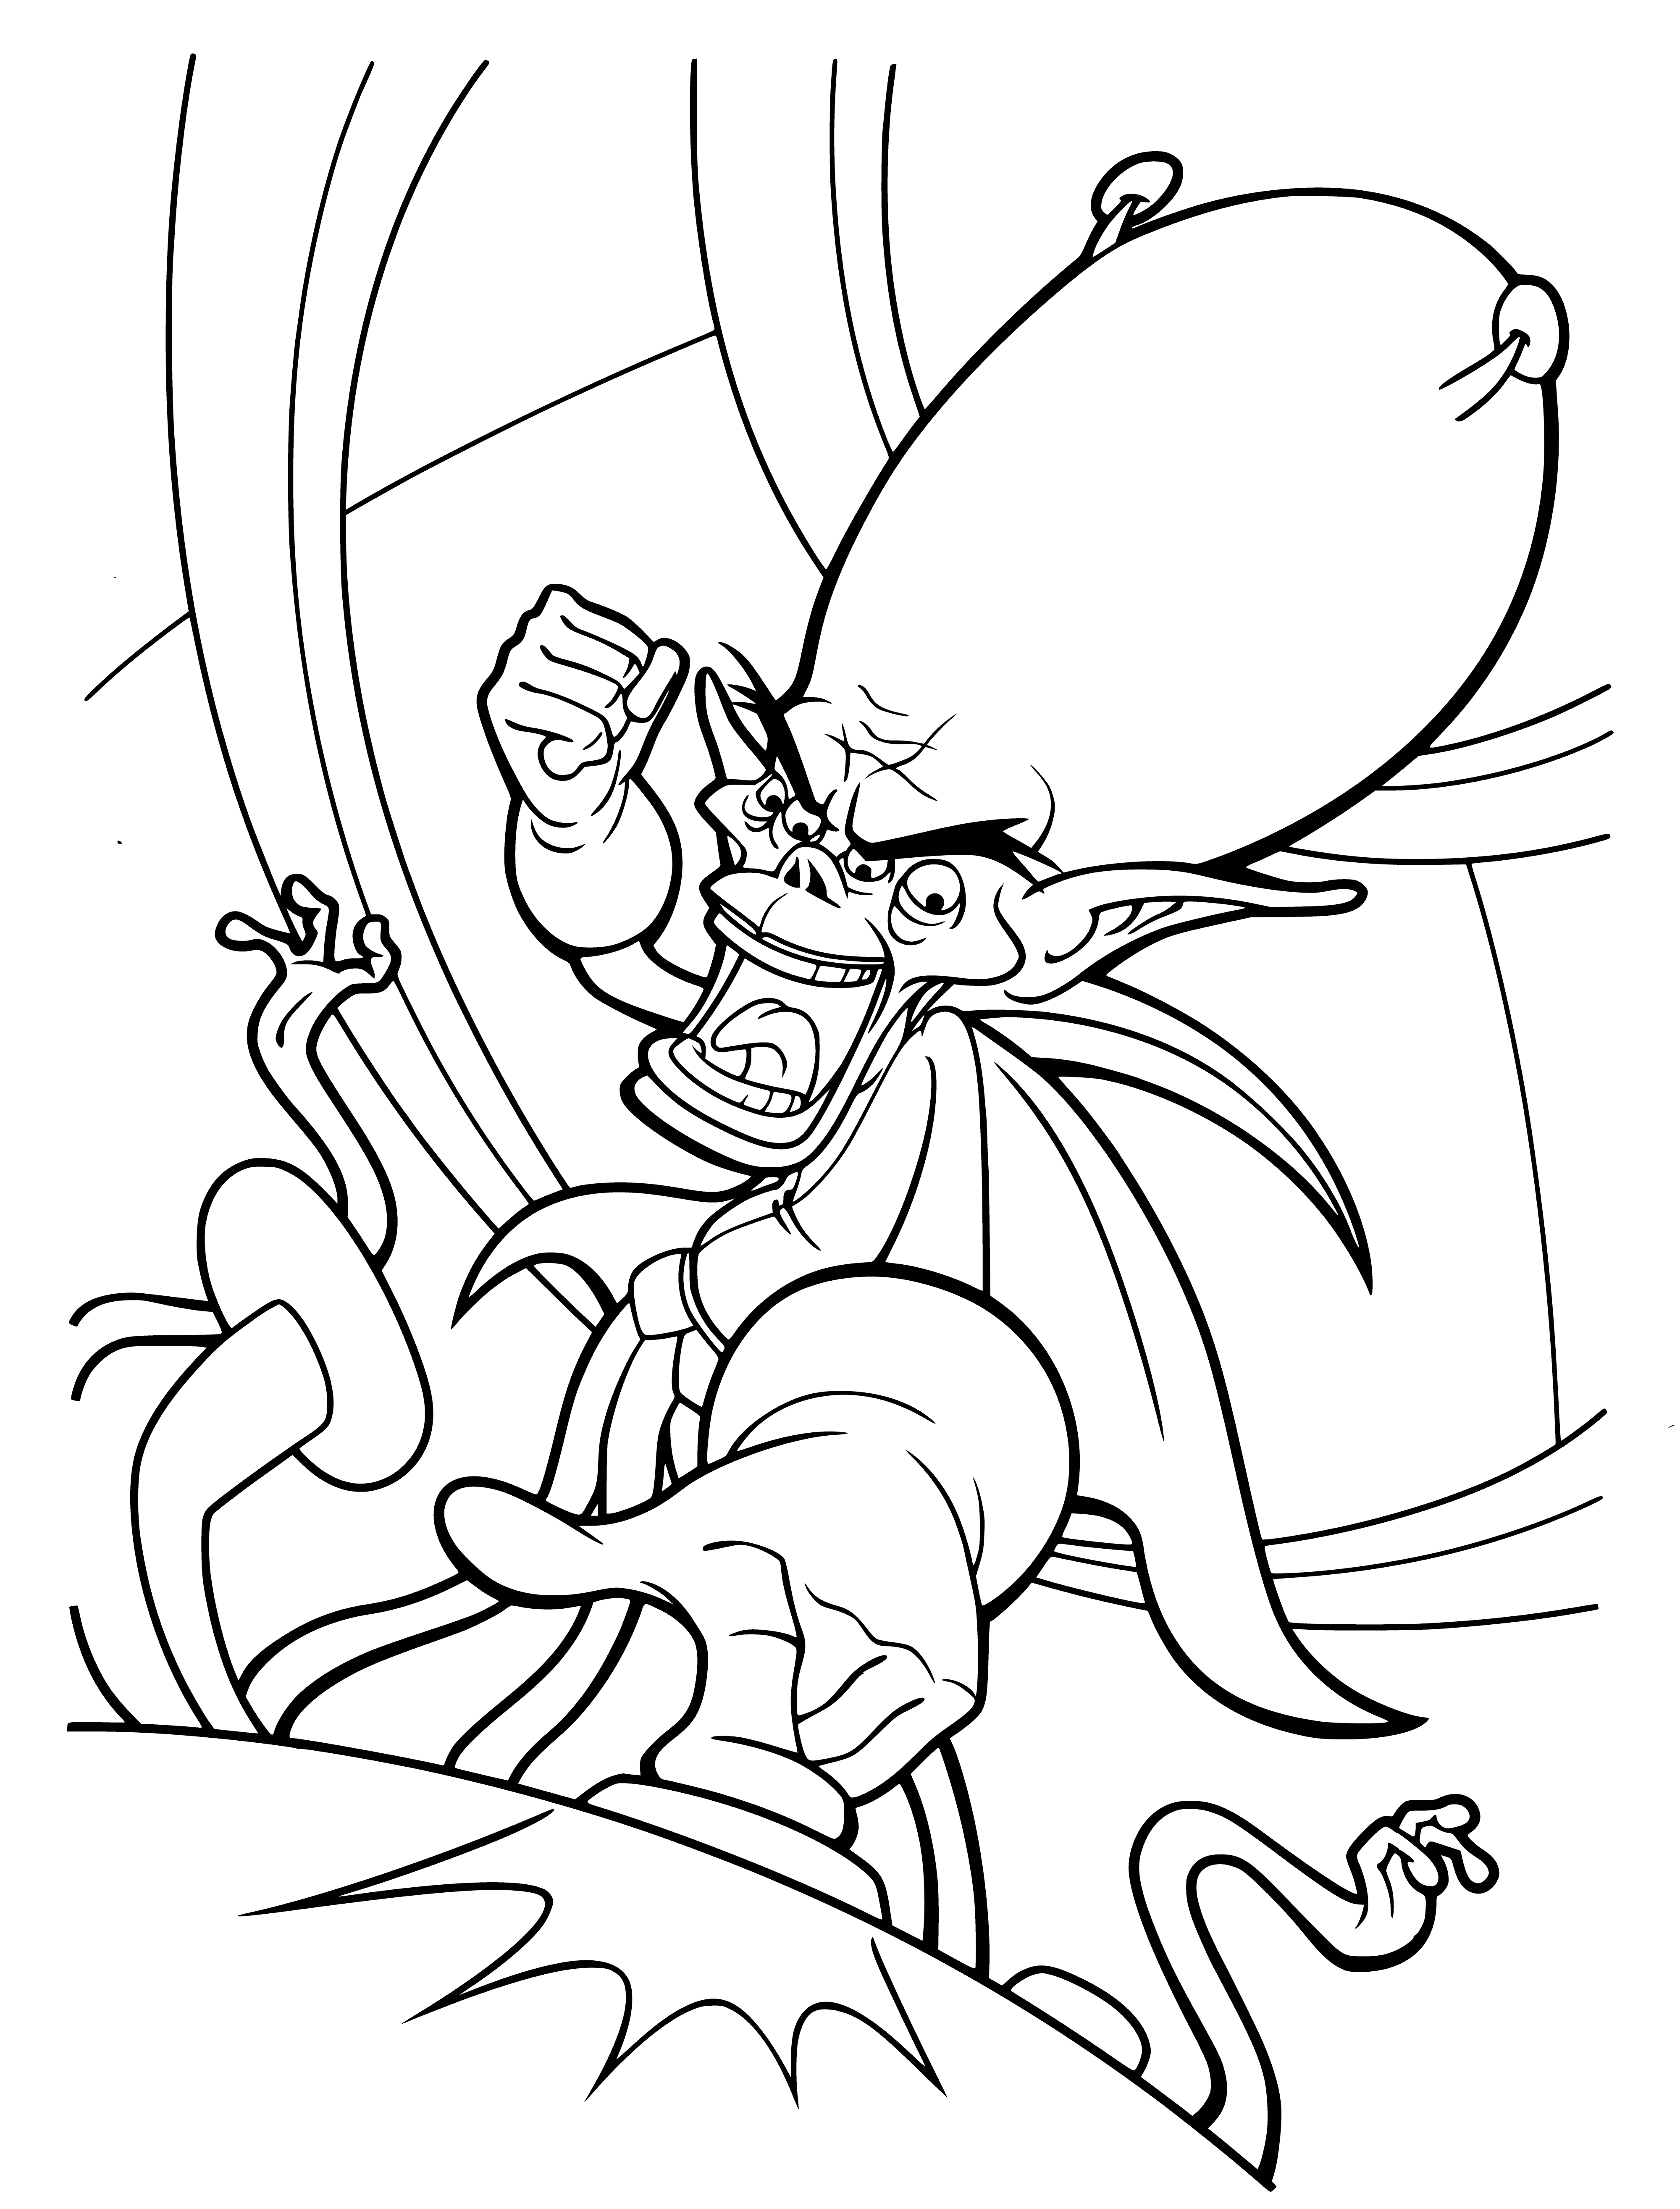 coloring page: Gallaxhar is a powerful alien overlord who abducts humans and experiments on them. He can shoot laser beams from his eyes.